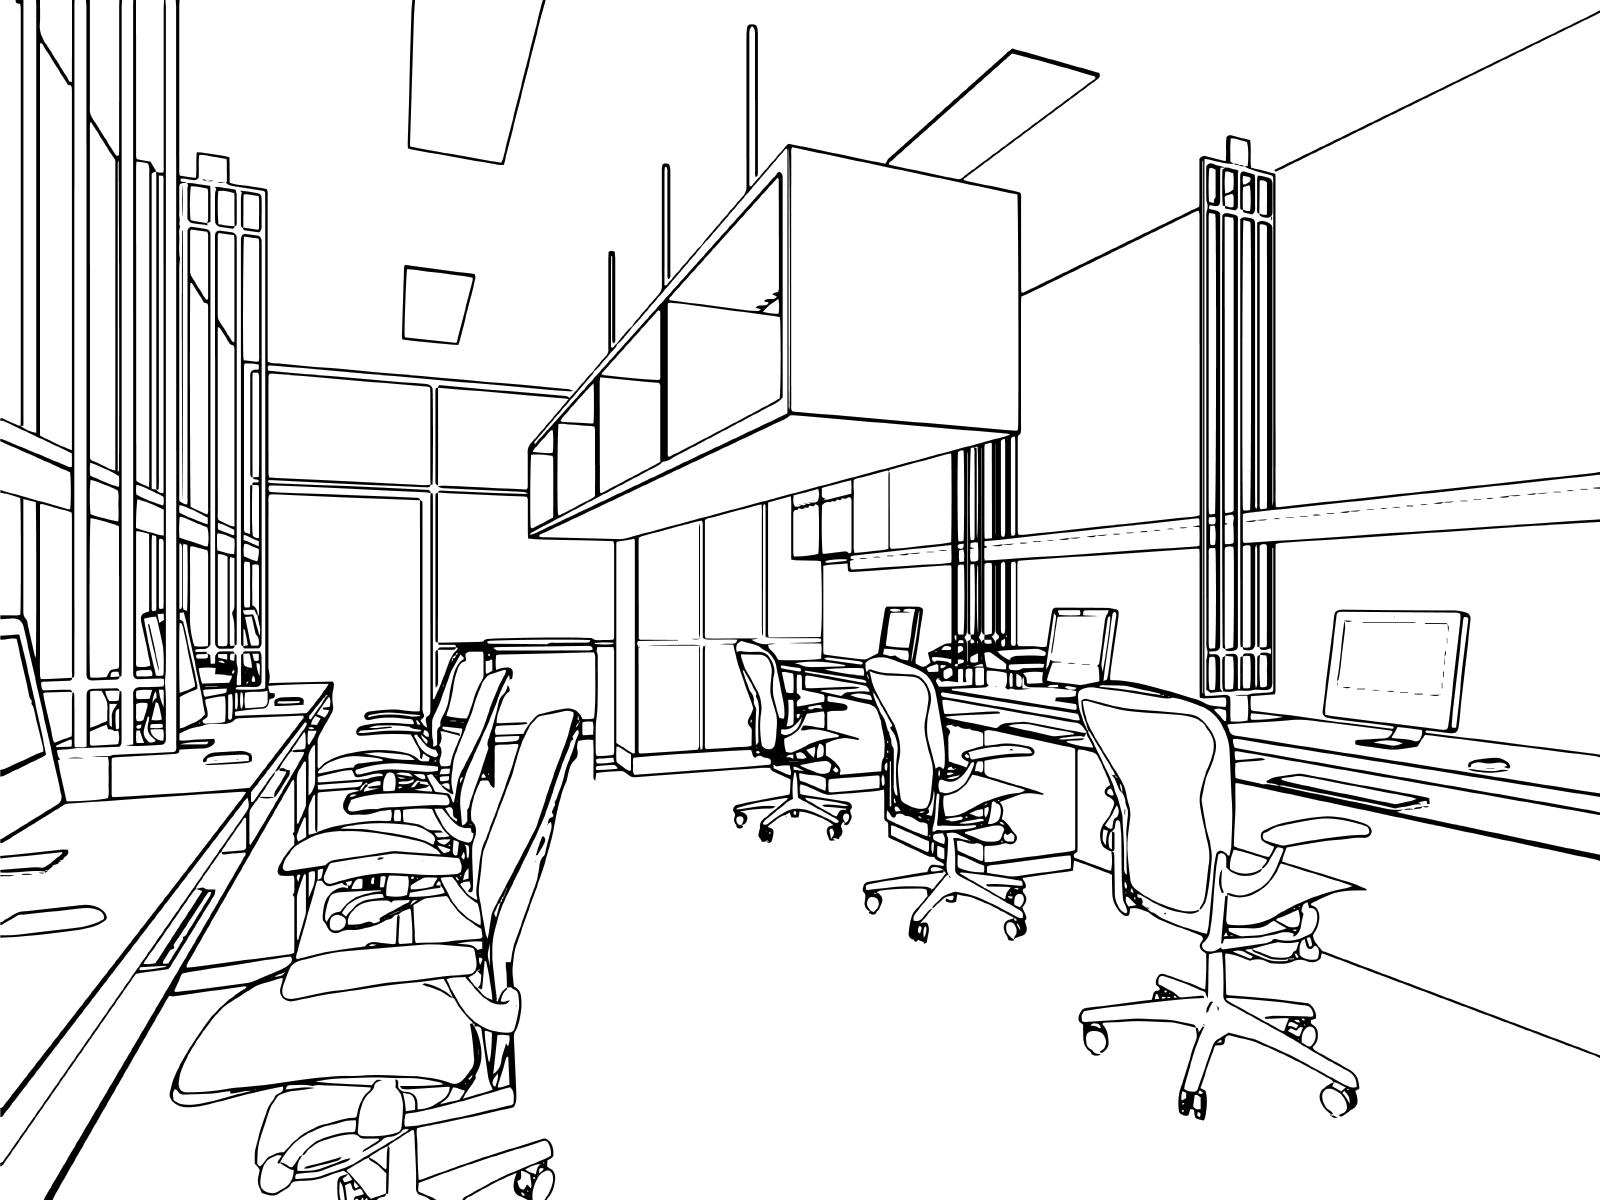 outline sketch of a interior office build out